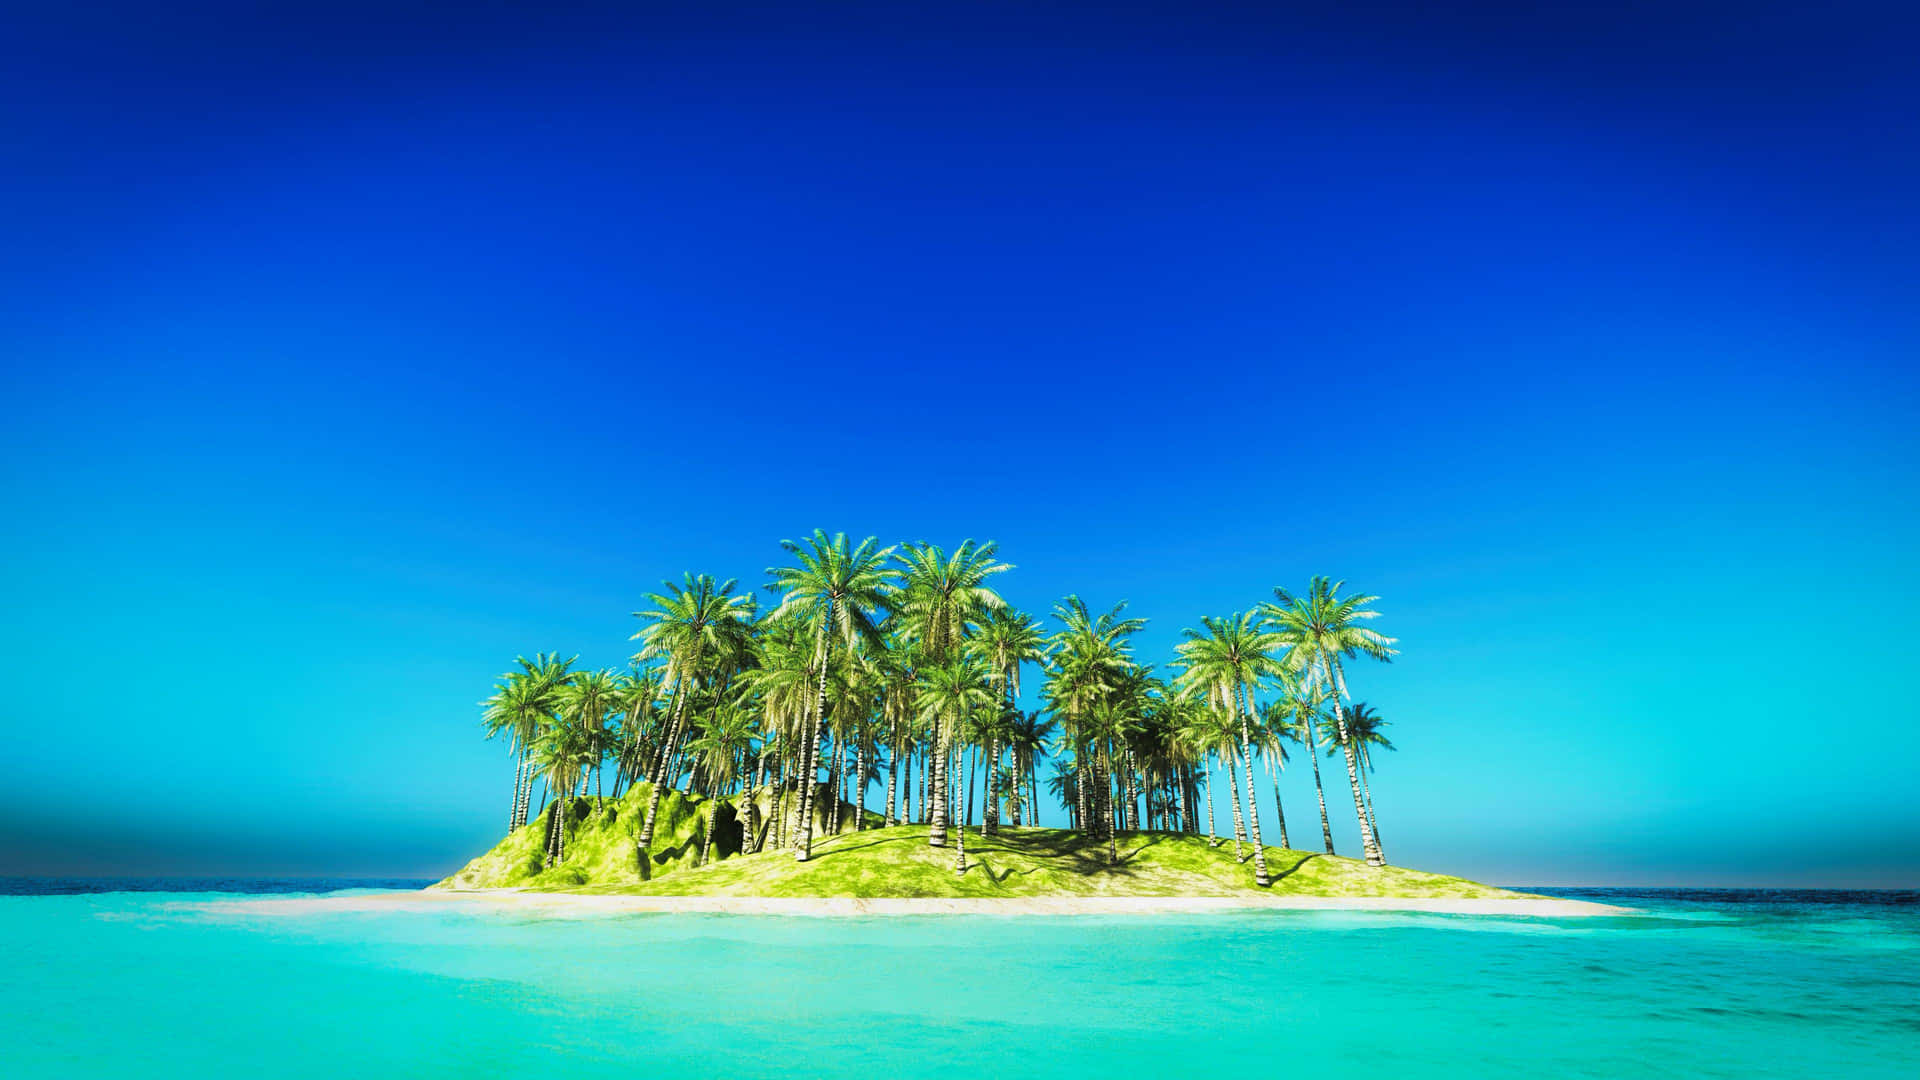 A Small Island With Palm Trees In The Water